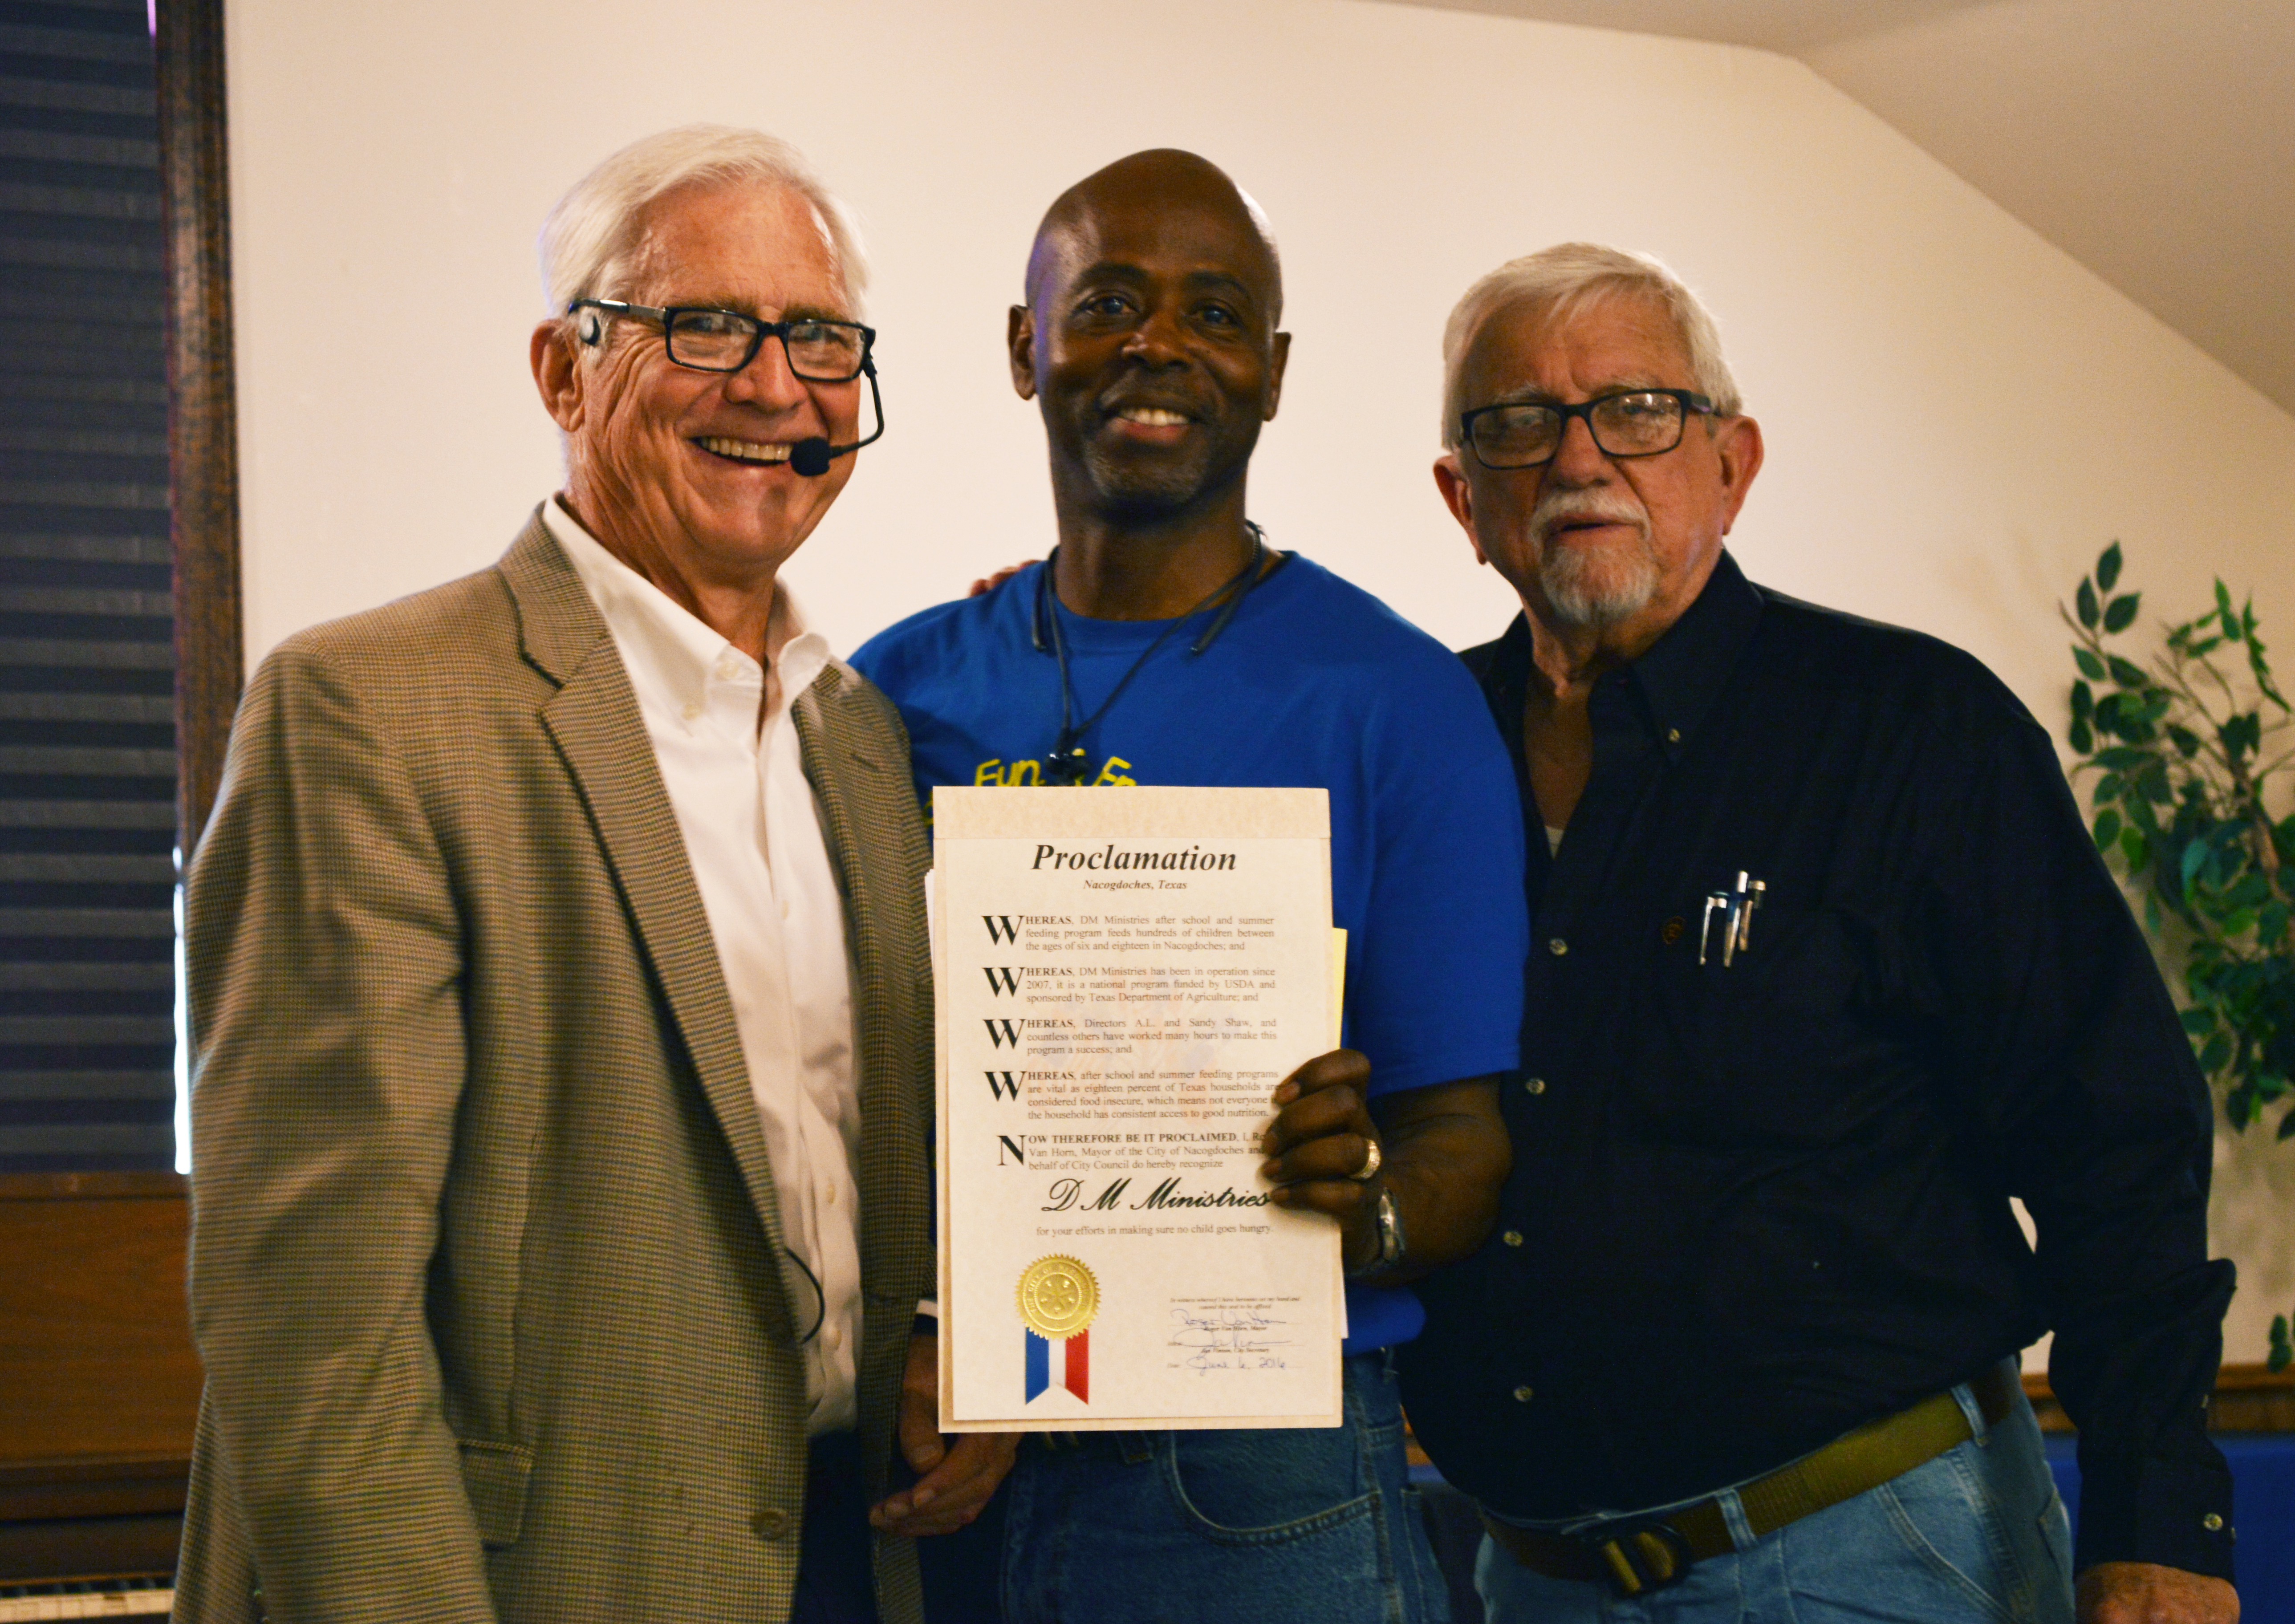 Pastor Al Shaw (pictured at center) of Davis Memorial Church accepts a proclamation from the City of Nachogdoches, supporting the church’s efforts around summer meals.